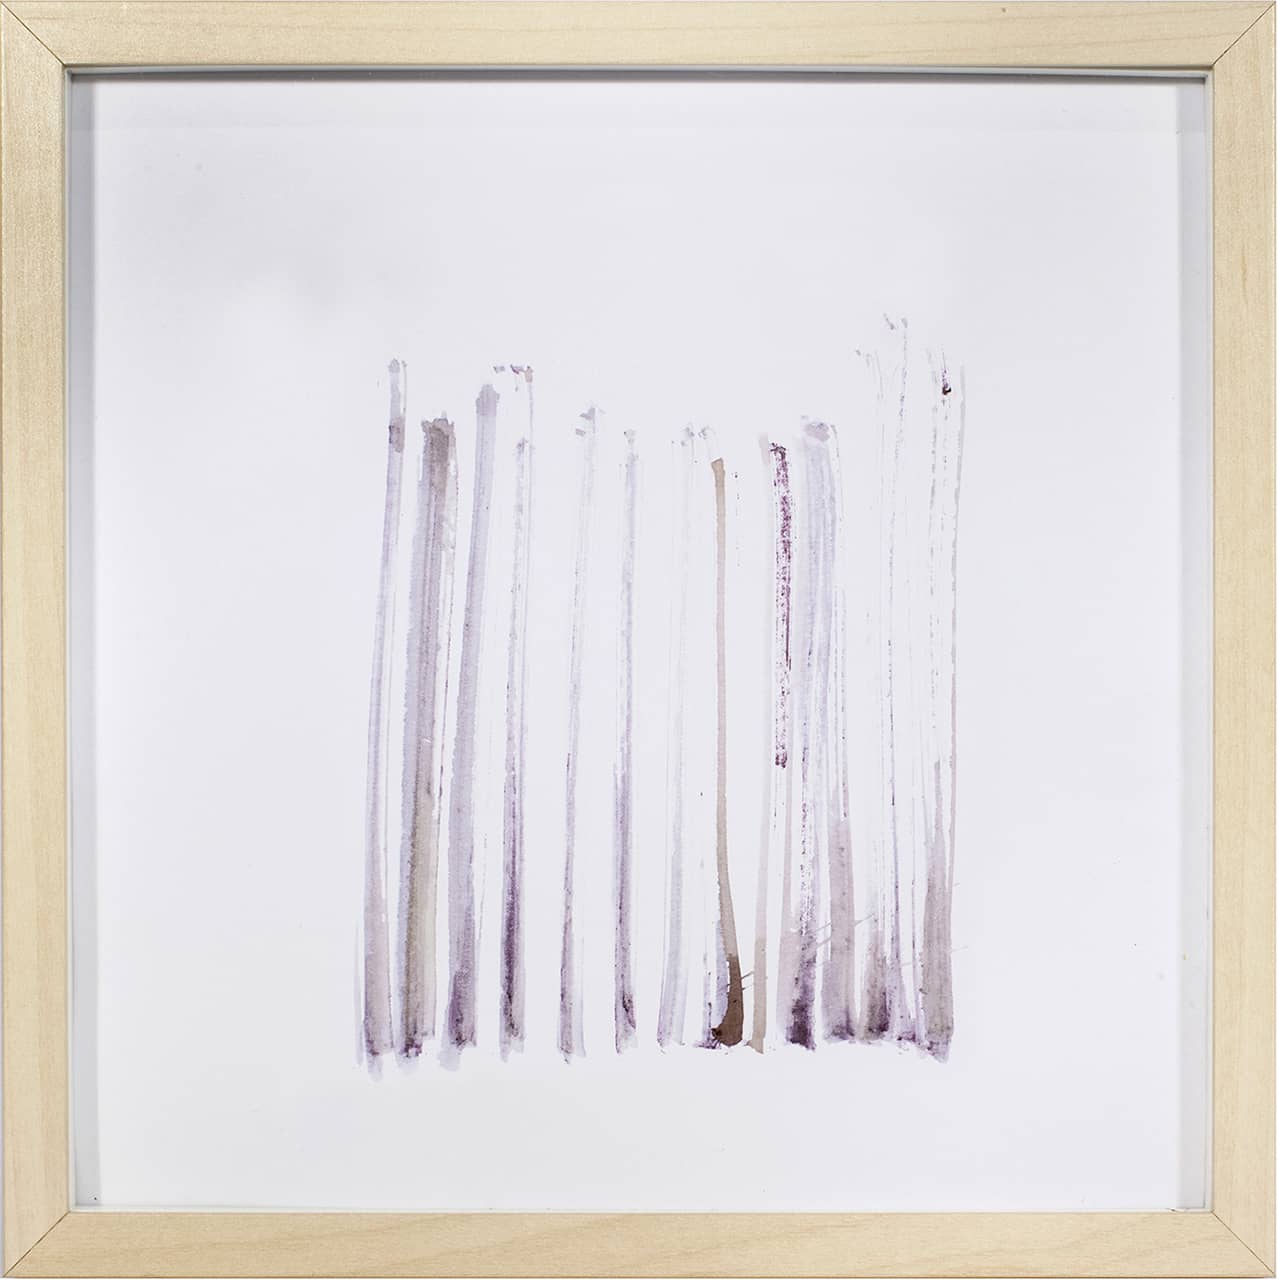 'Rubia Peregrina, assemblage (plant and organic pigment on paper). Artwork by Francesca Virginia Coppola